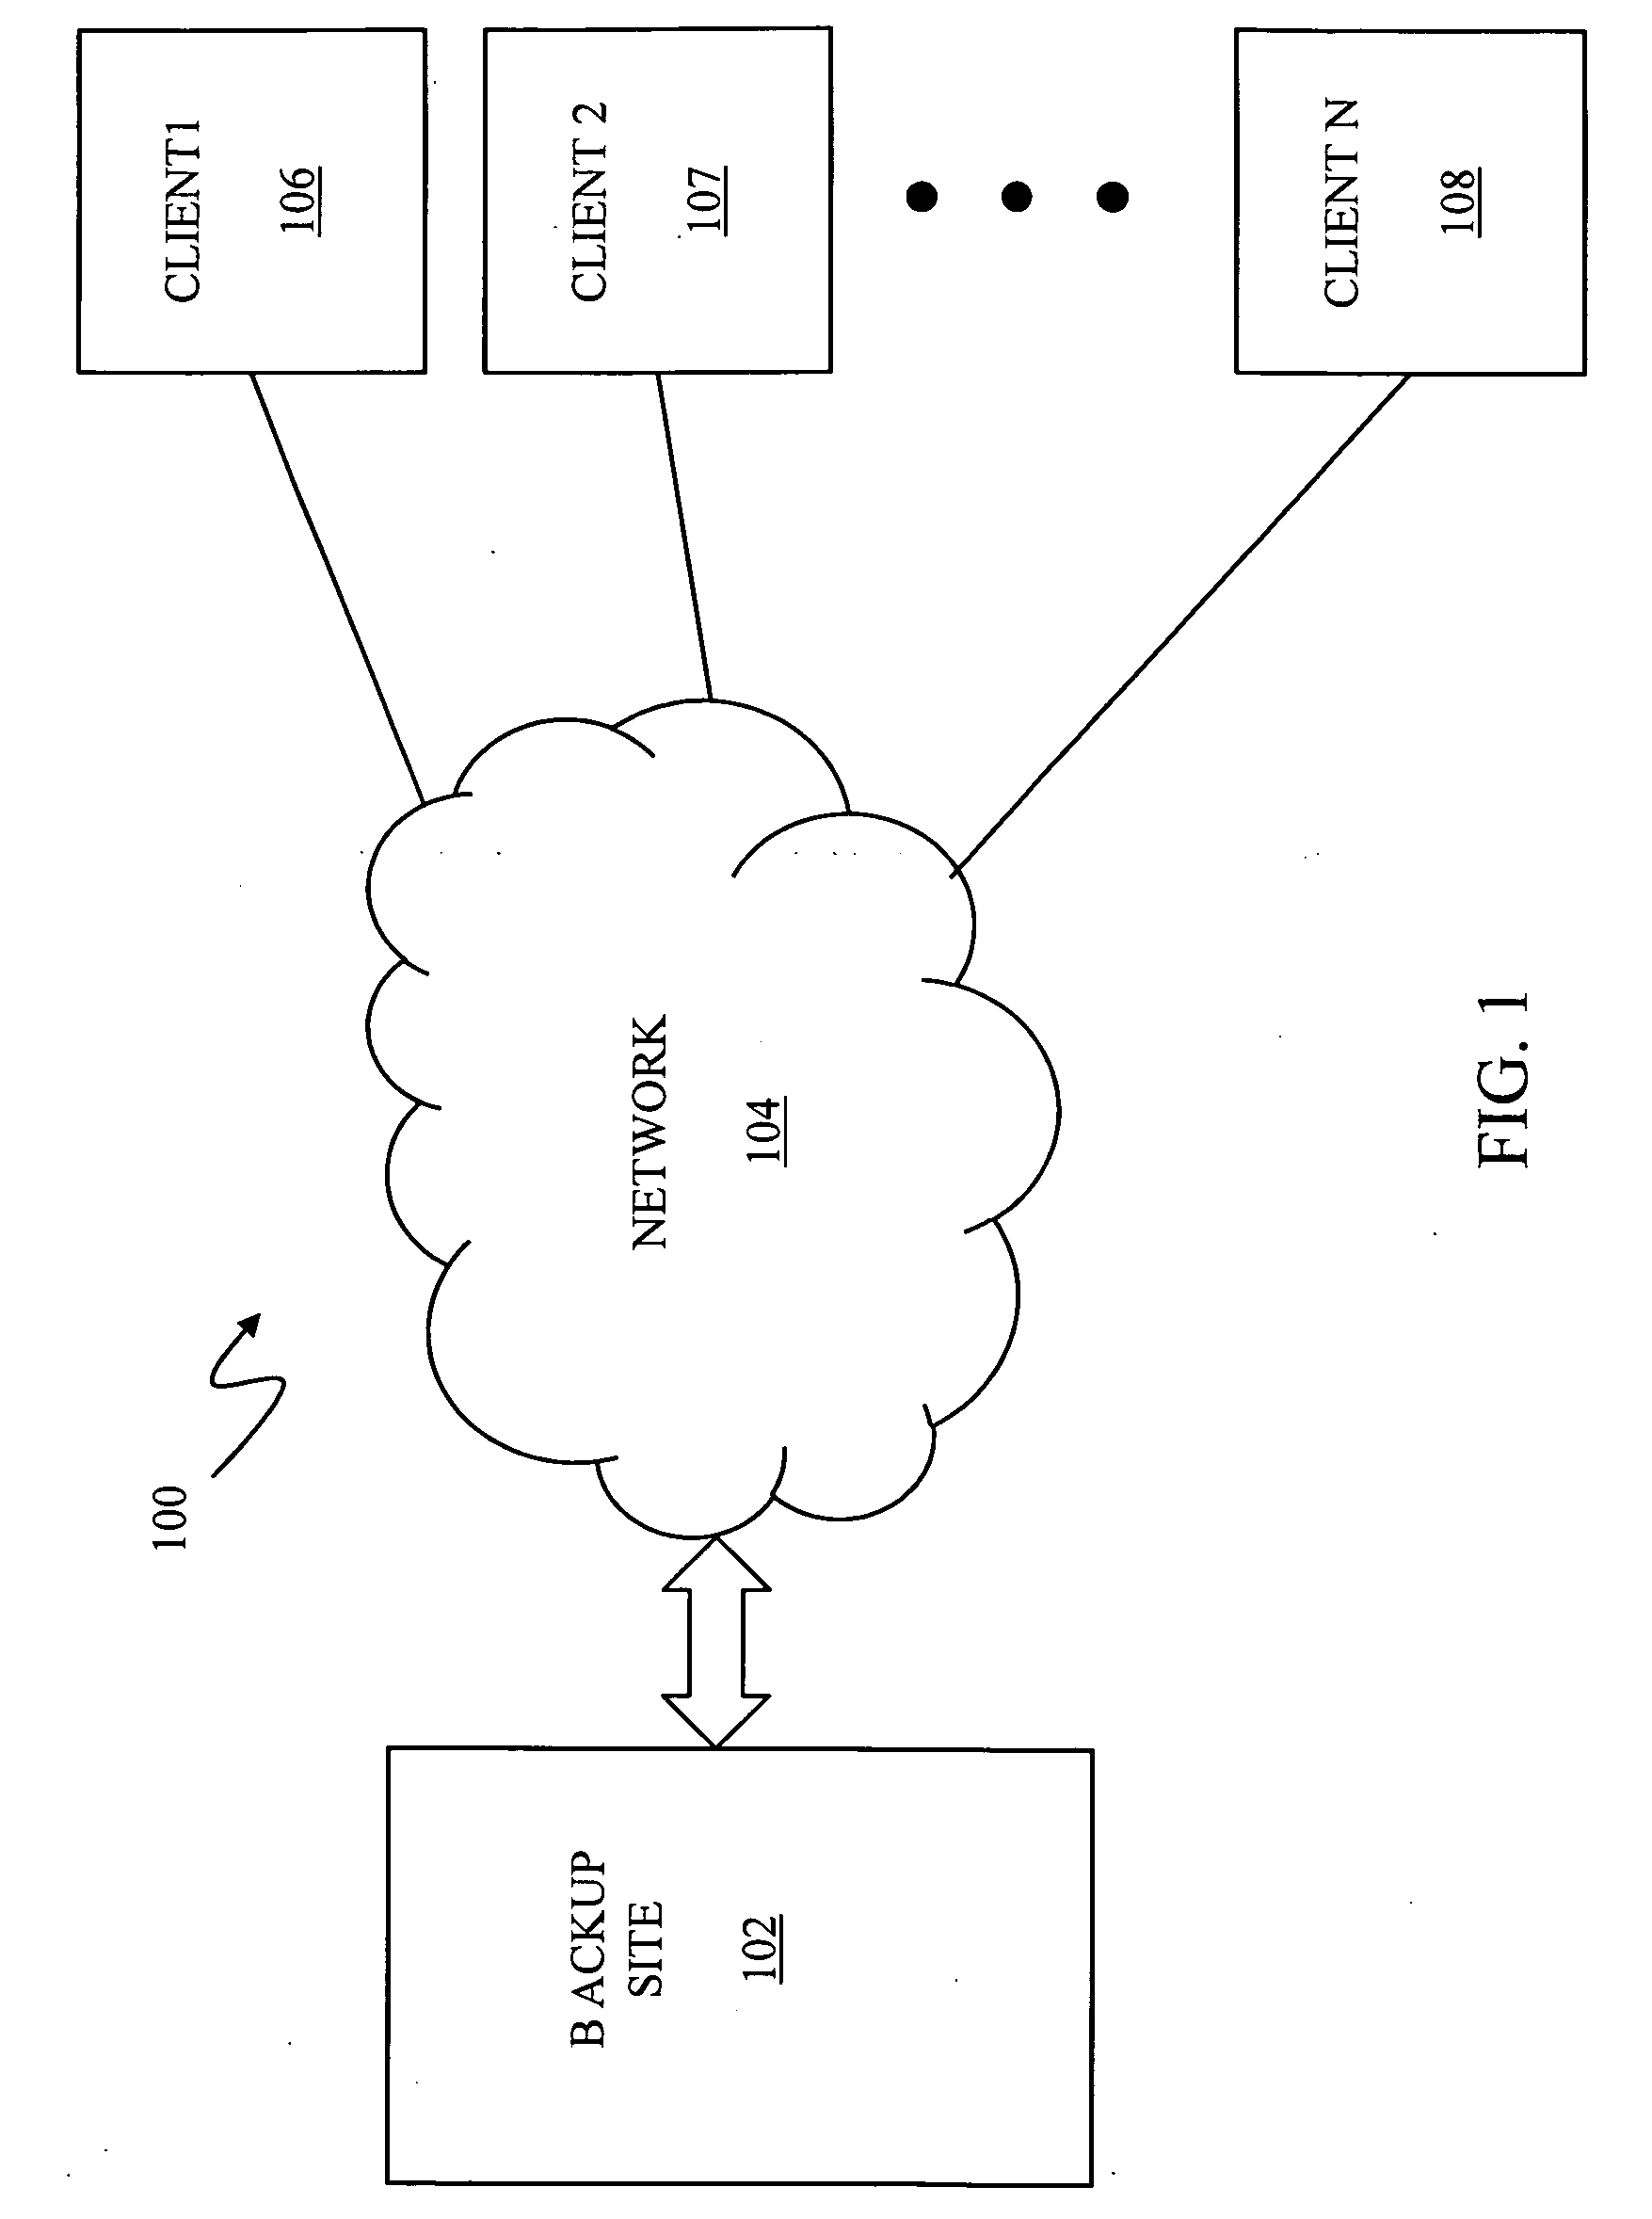 Obtaining backups using a portable storage device